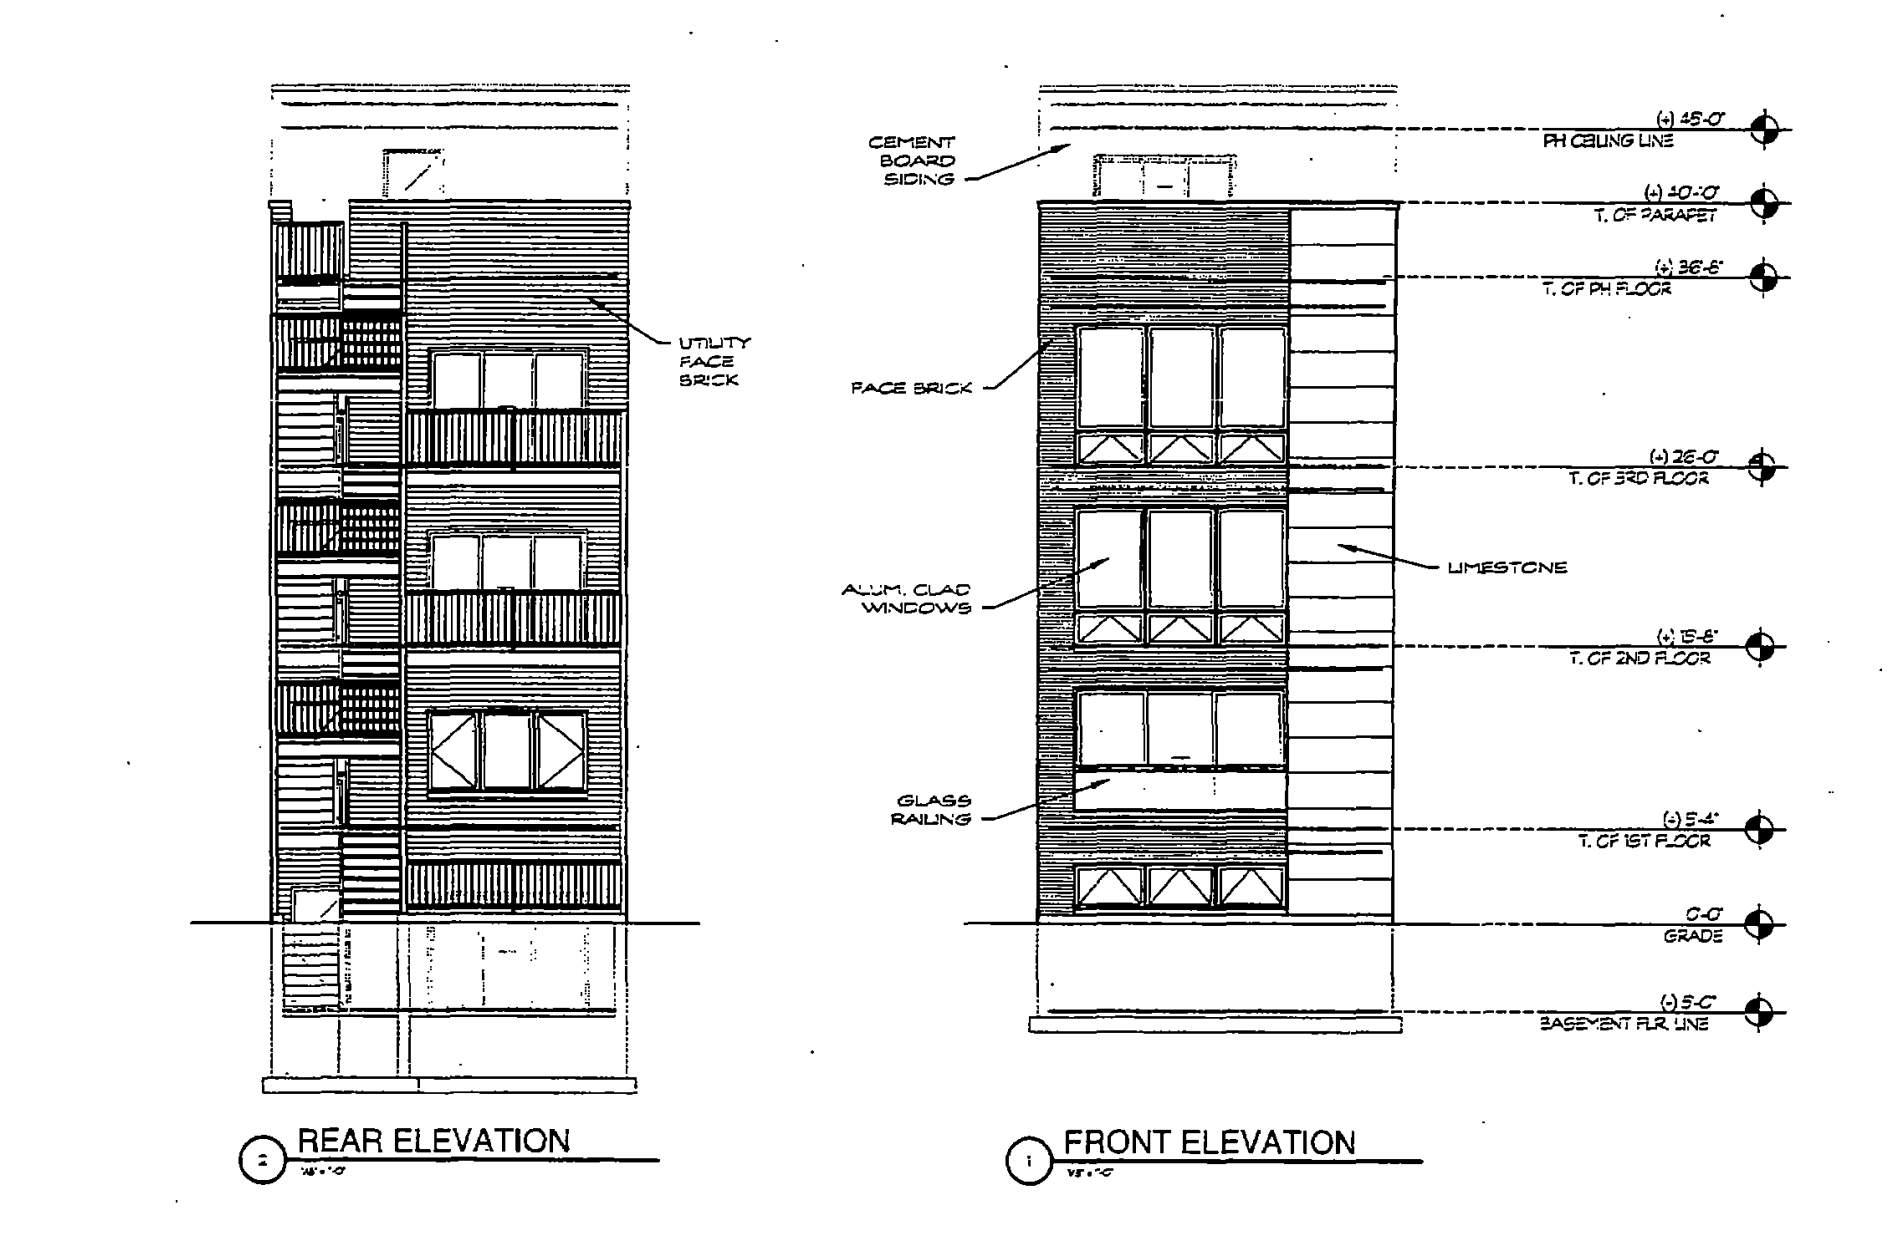 1423 W Huron Street front and rear elevations